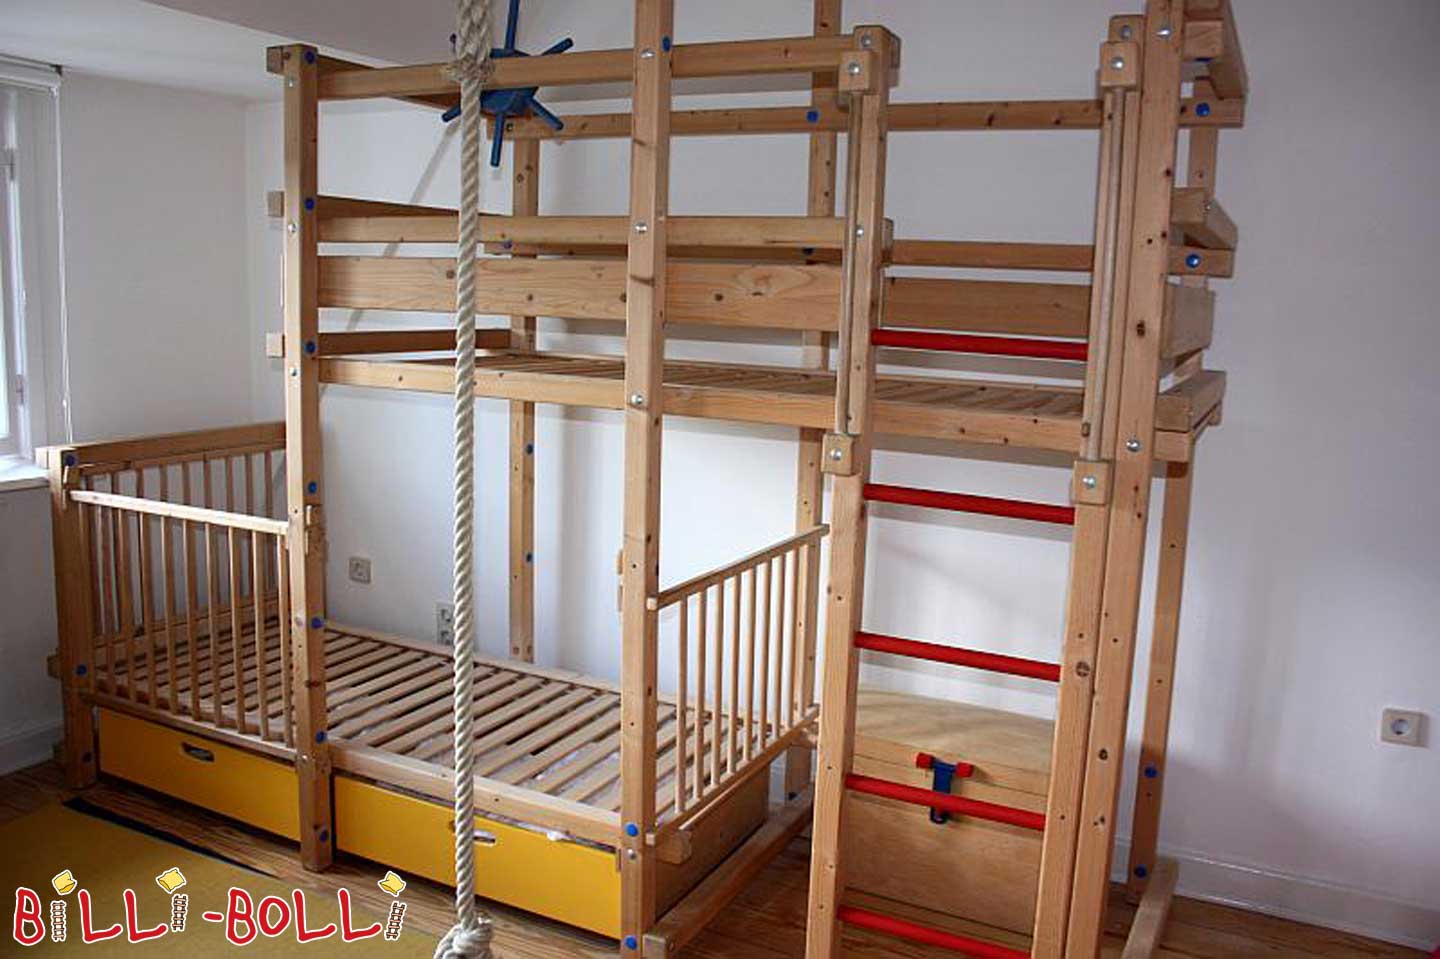 Billi-Bolli bunk bed laterally offset (Category: second hand bunk bed)